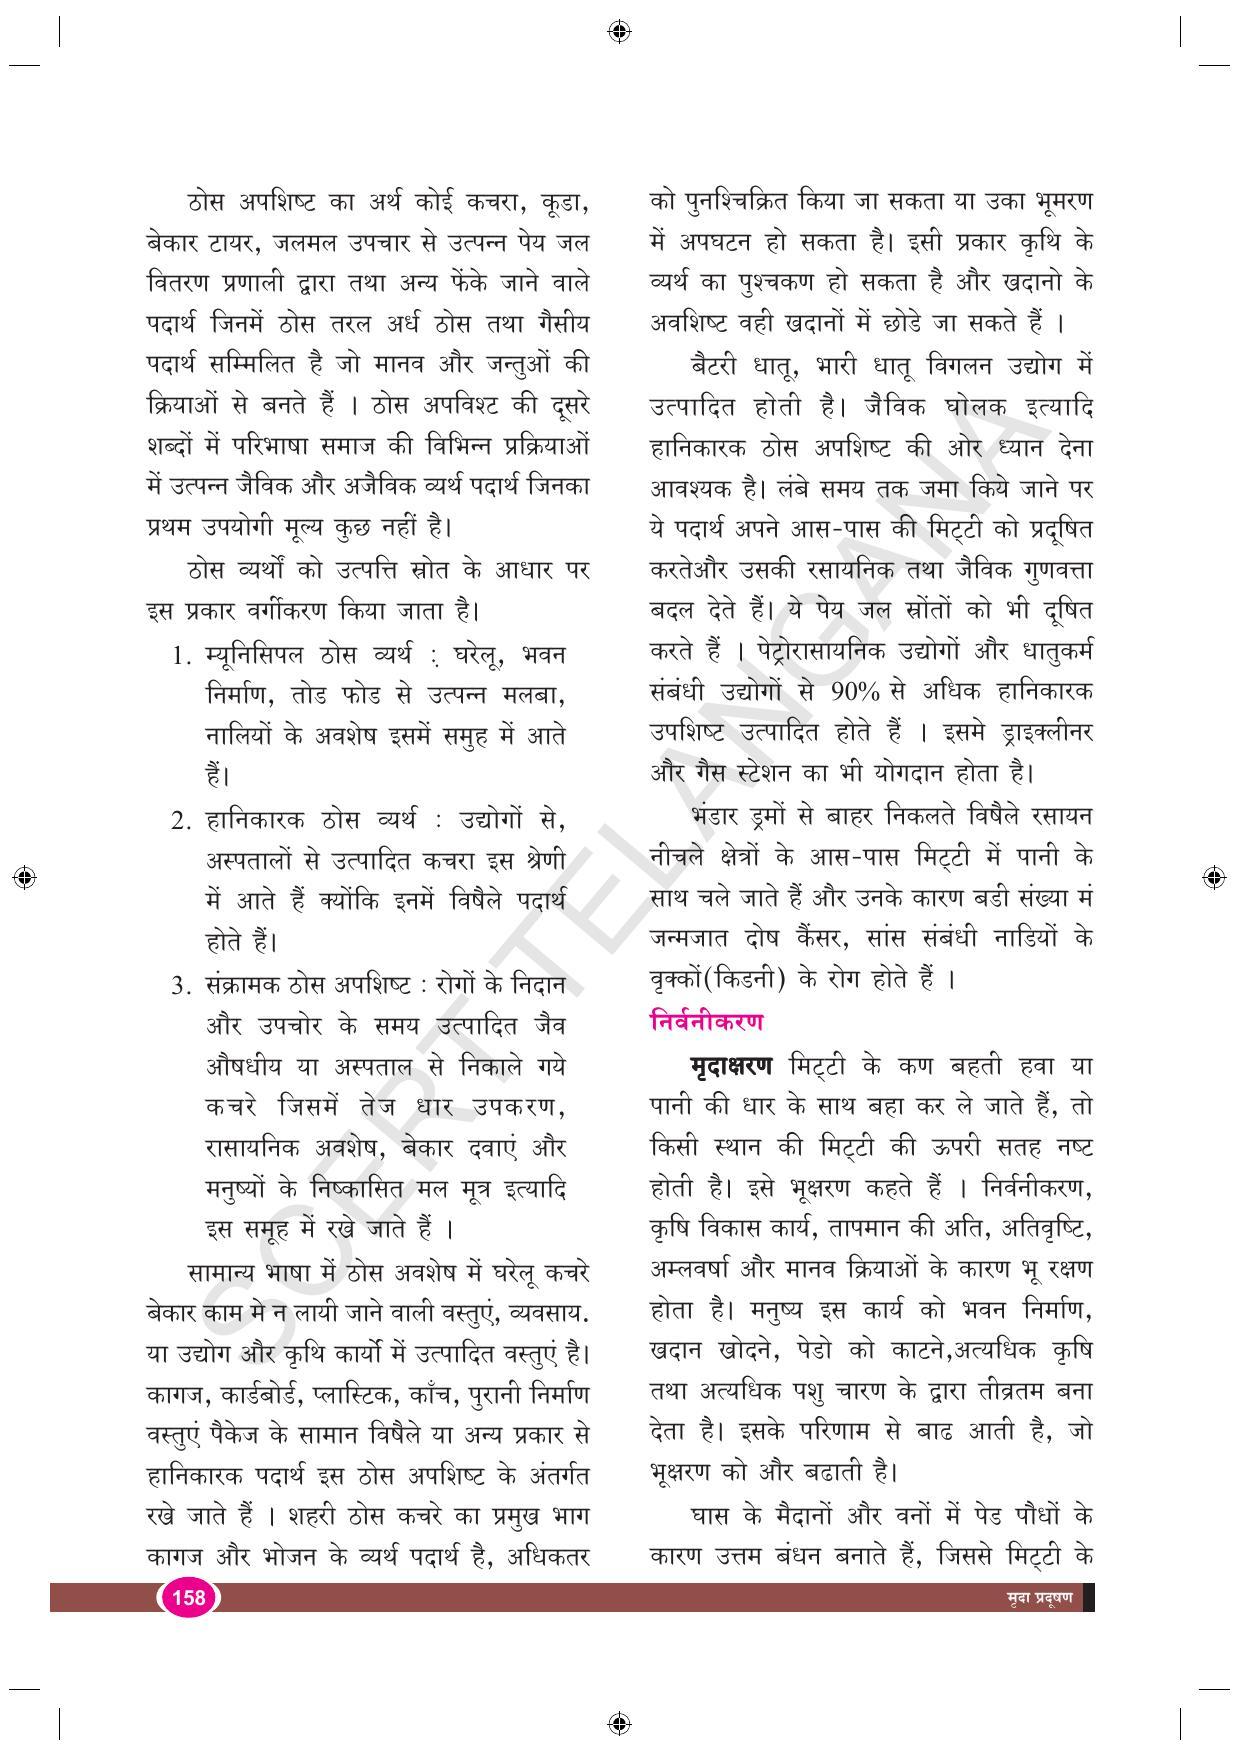 TS SCERT Class 9 Biological Science (Hindi Medium) Text Book - Page 170